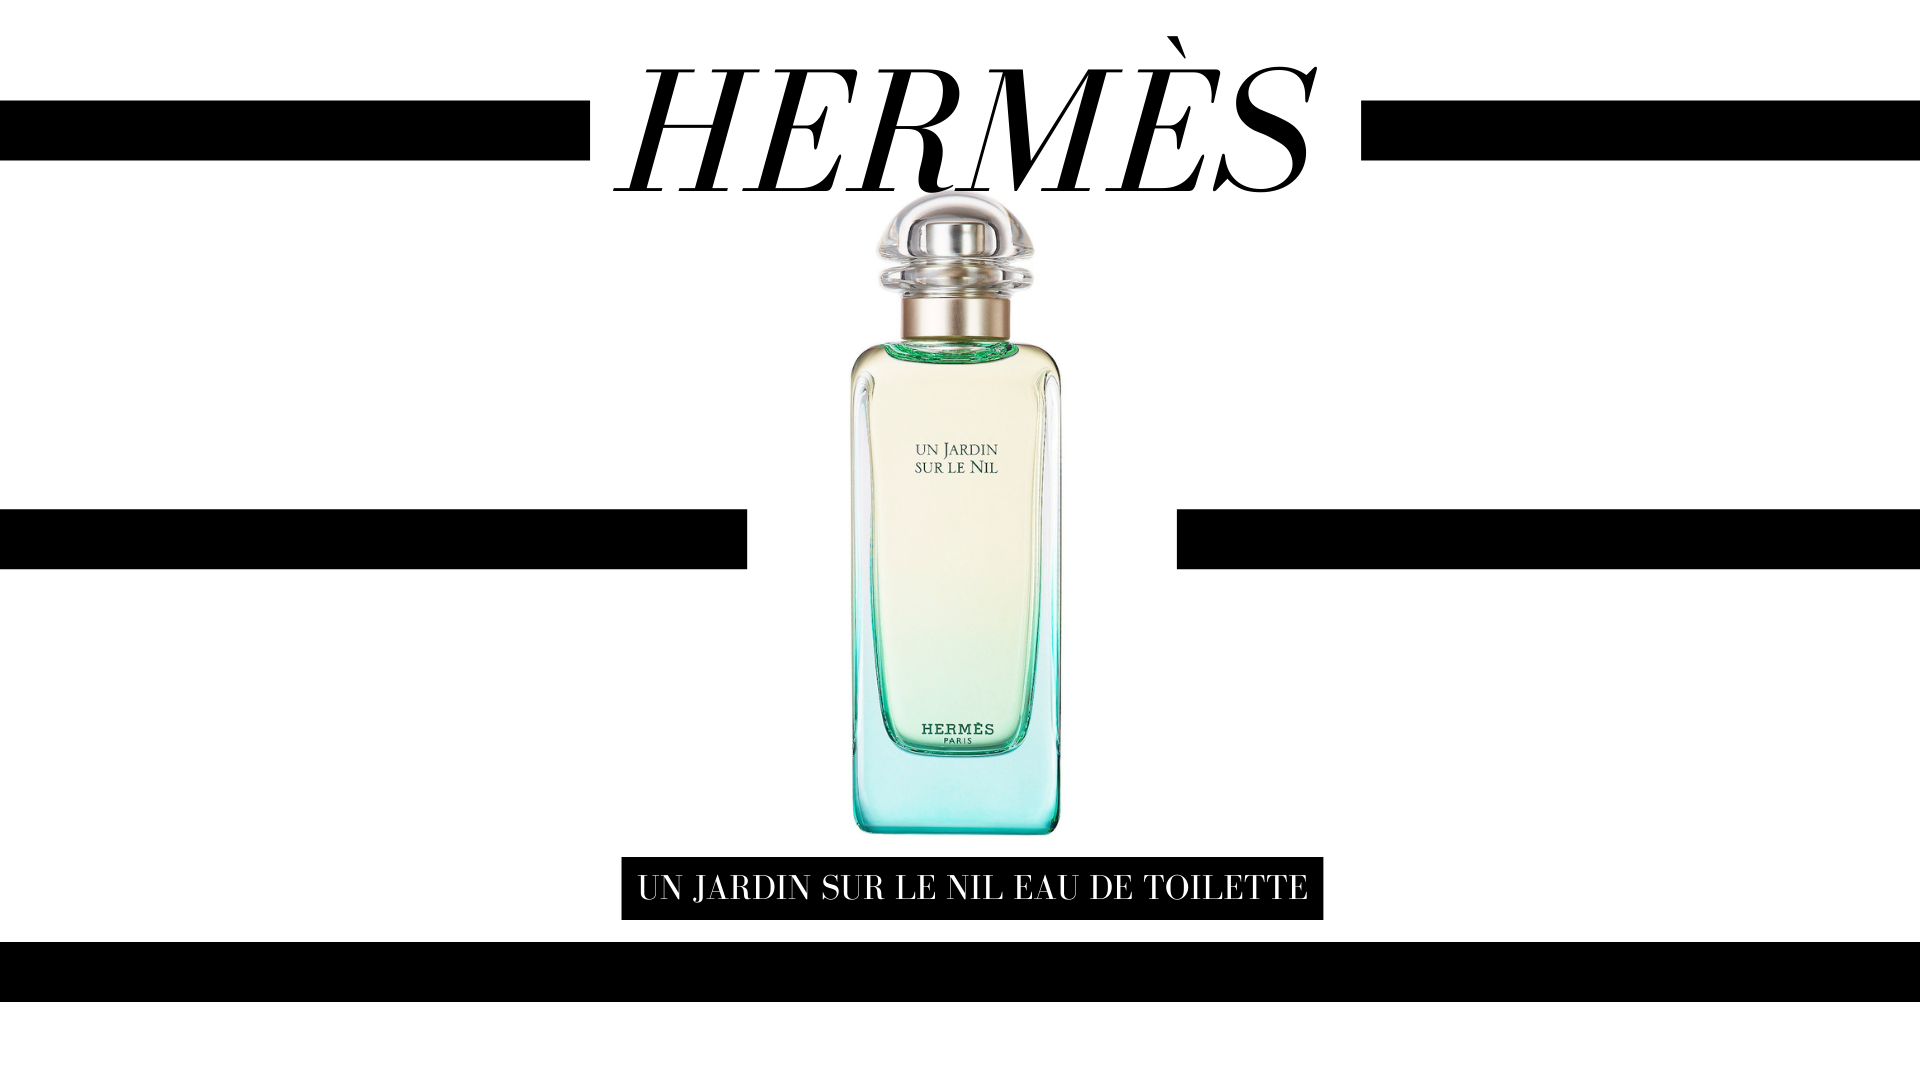 Un Jardin sur le Nil Eau de Toilett. - First of all, let's take a moment to appreciate this fragrance name! Such a magical and fresh impression! This fragrance is super wearable and feels very expensive - like everything Hermès. With keynotes of green mango, lotus blossom, incense, sycamore wood, this scent is becoming the reflection of a green paradise!